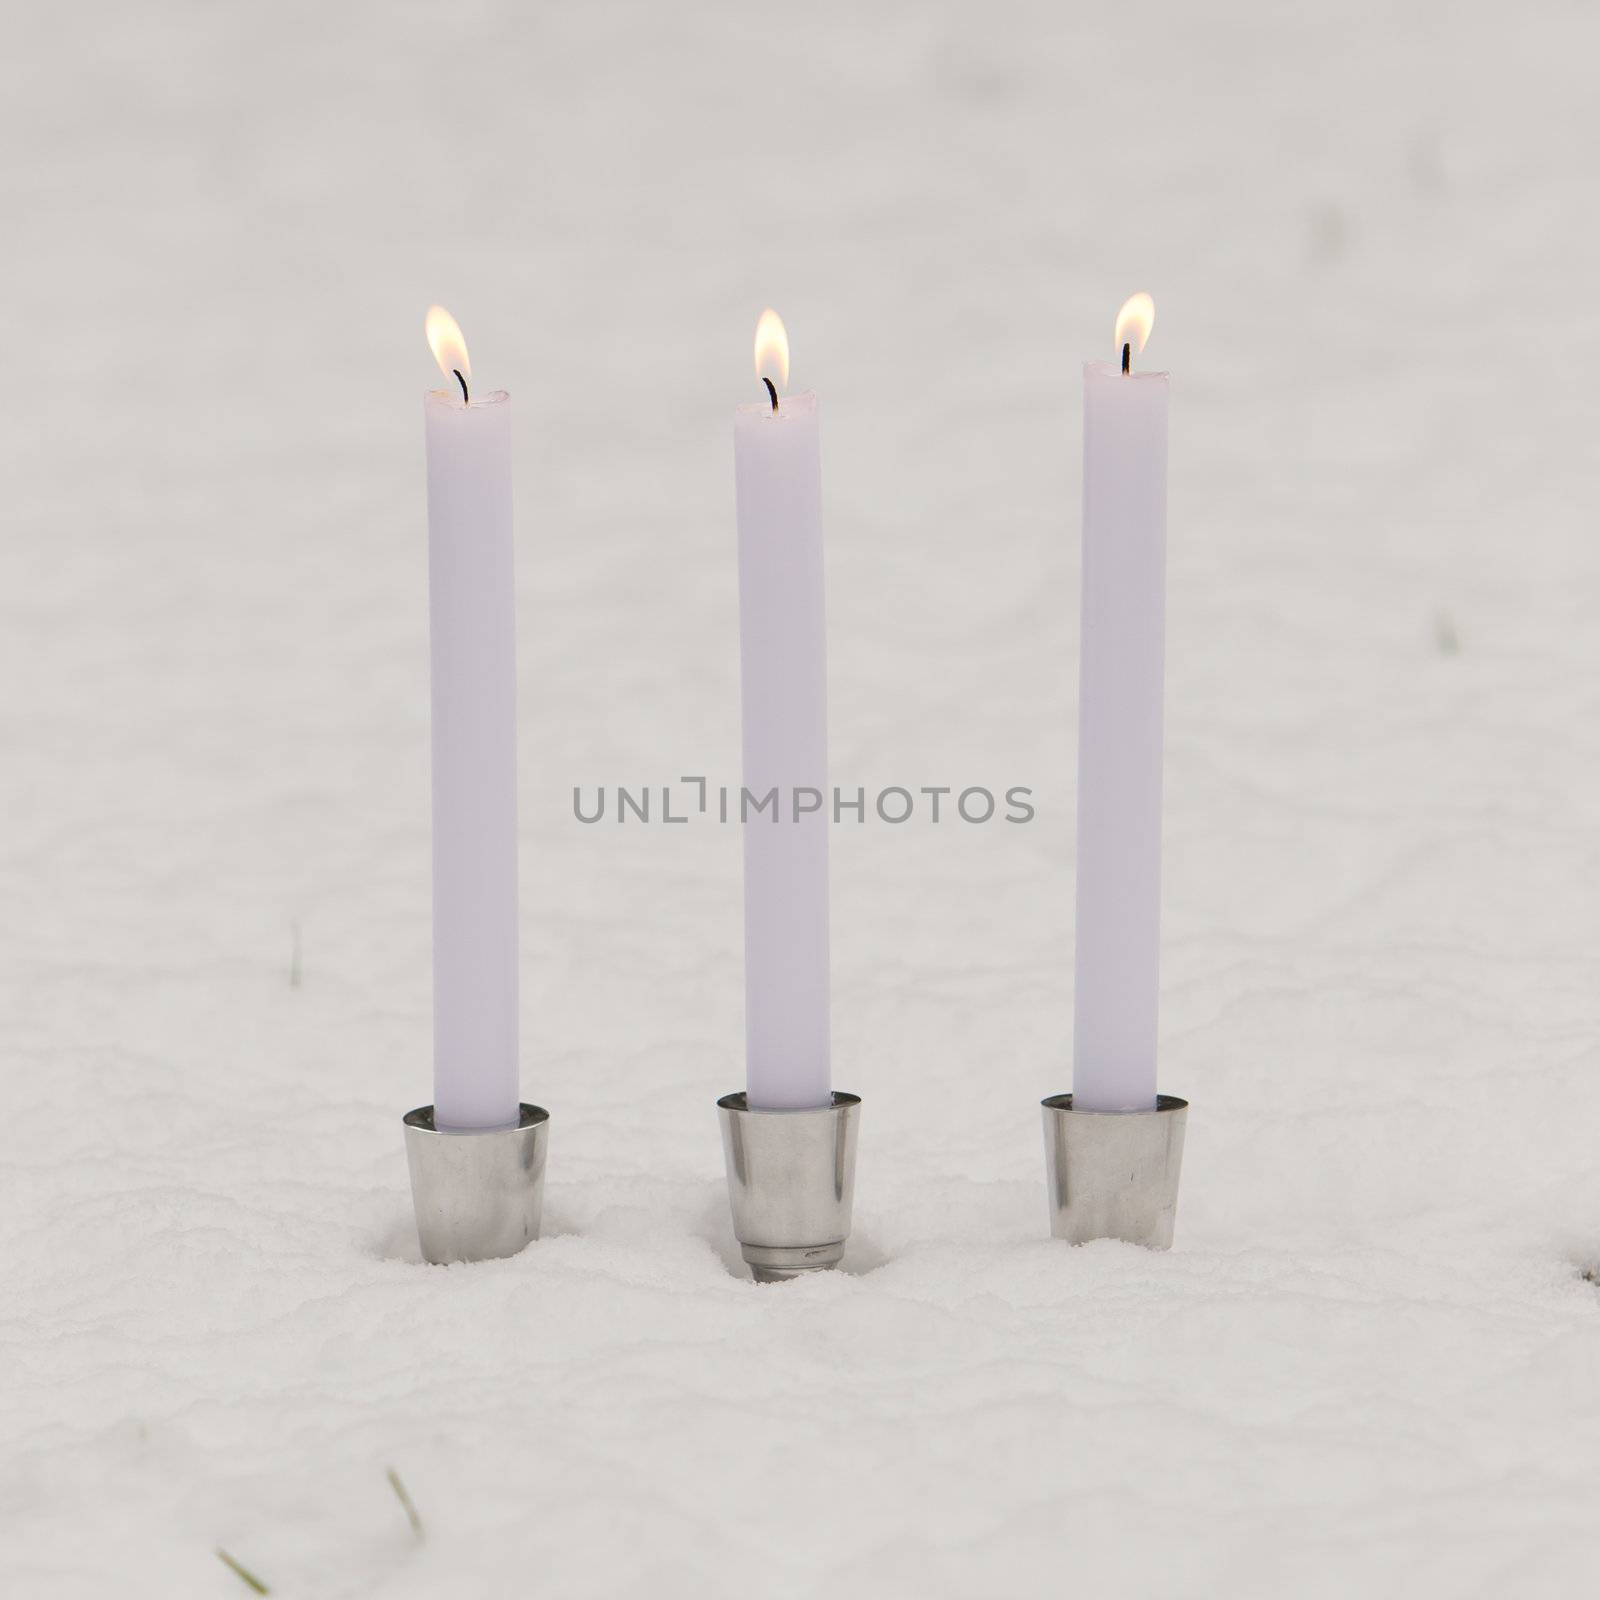 Three burning candles standing in the snow